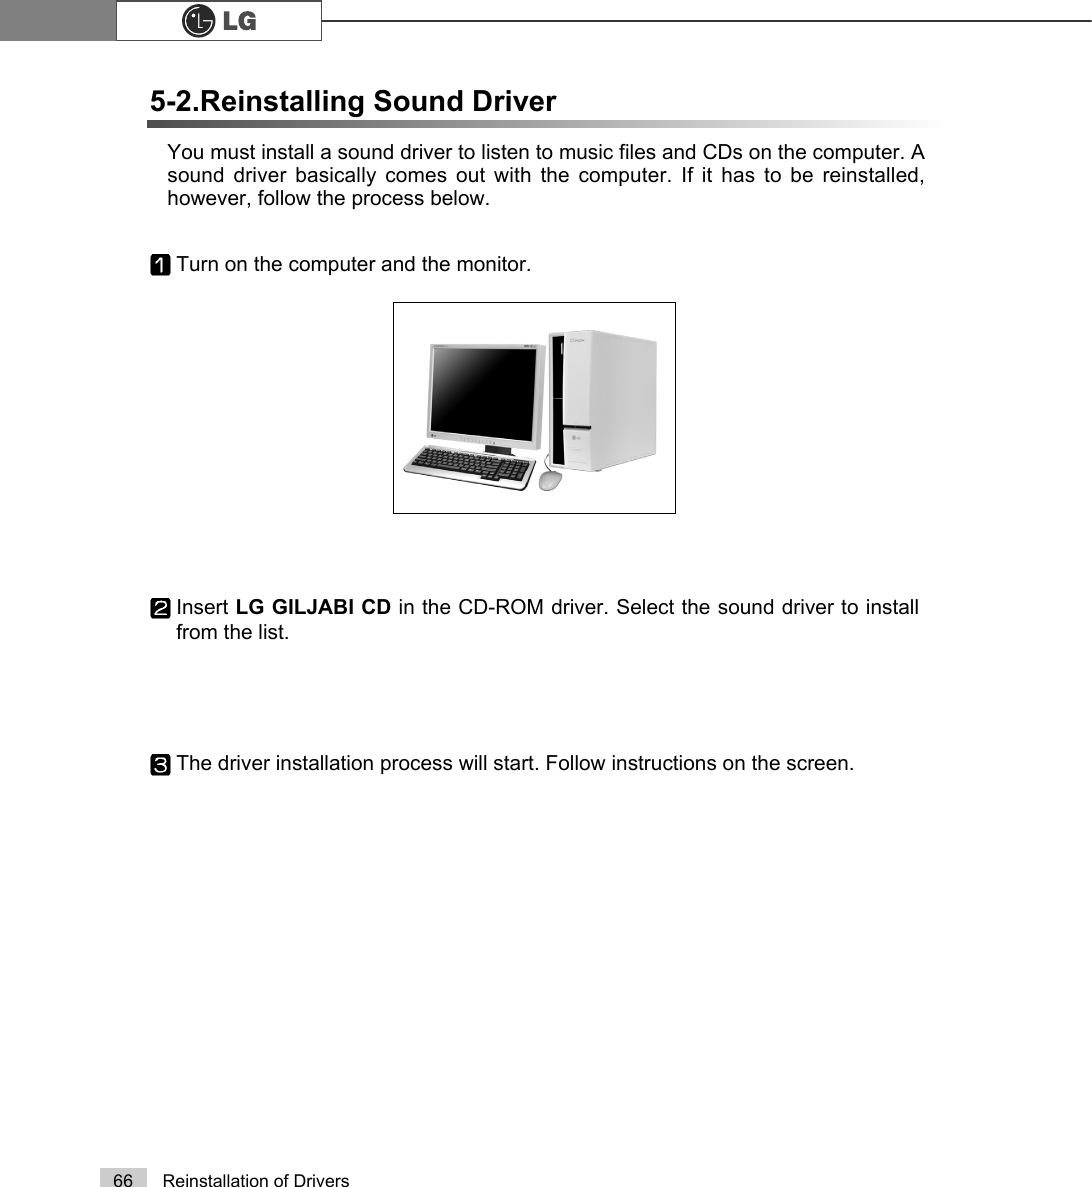 66 Reinstallation of DriversYou must install a sound driver to listen to music files and CDs on the computer. Asound driver basically comes out with the computer. If it has to be reinstalled,however, follow the process below.5-2.Reinstalling Sound DriverTurn on the computer and the monitor.Insert LG GILJABI CD in the CD-ROM driver. Select the sound driver to installfrom the list.The driver installation process will start. Follow instructions on the screen.